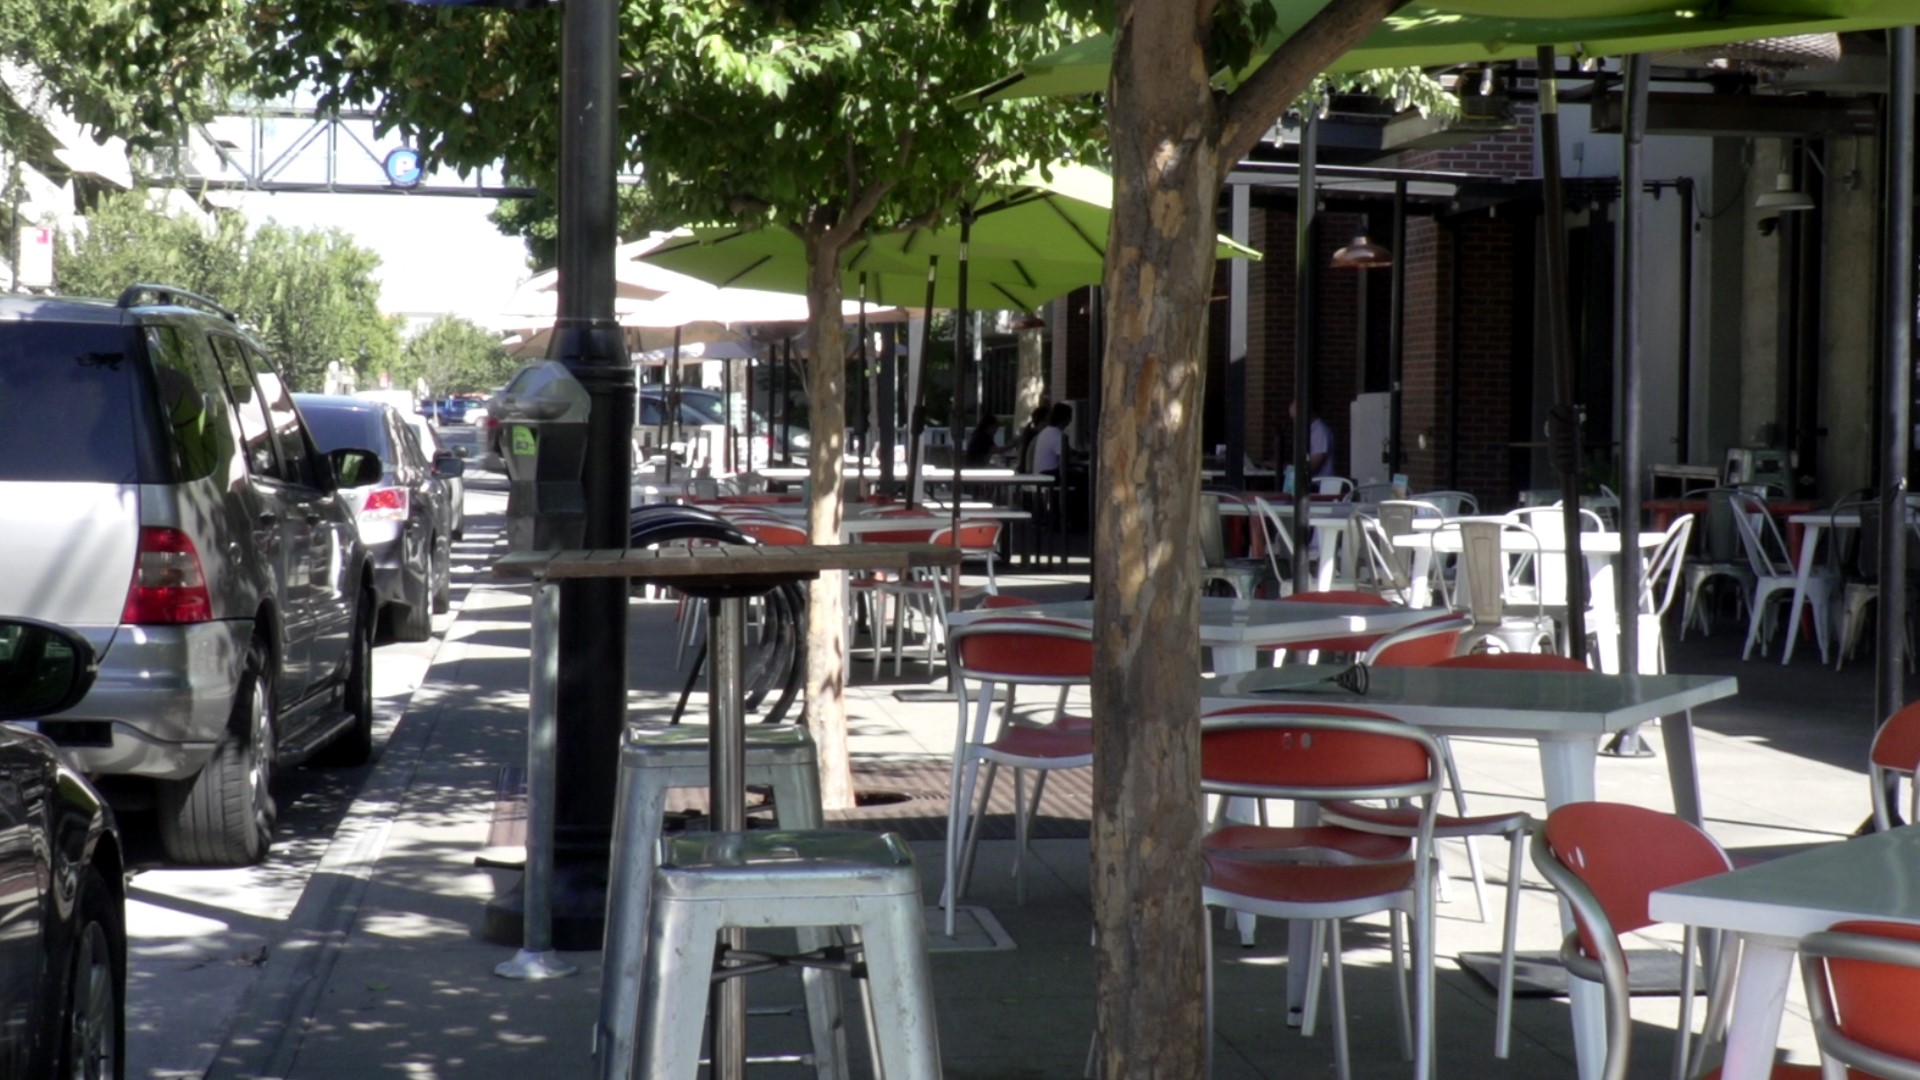 The R Street Partnership said a change in Sacramento's outdoor dining program meant keeping R Street closed 24/7 was no longer sustainable.